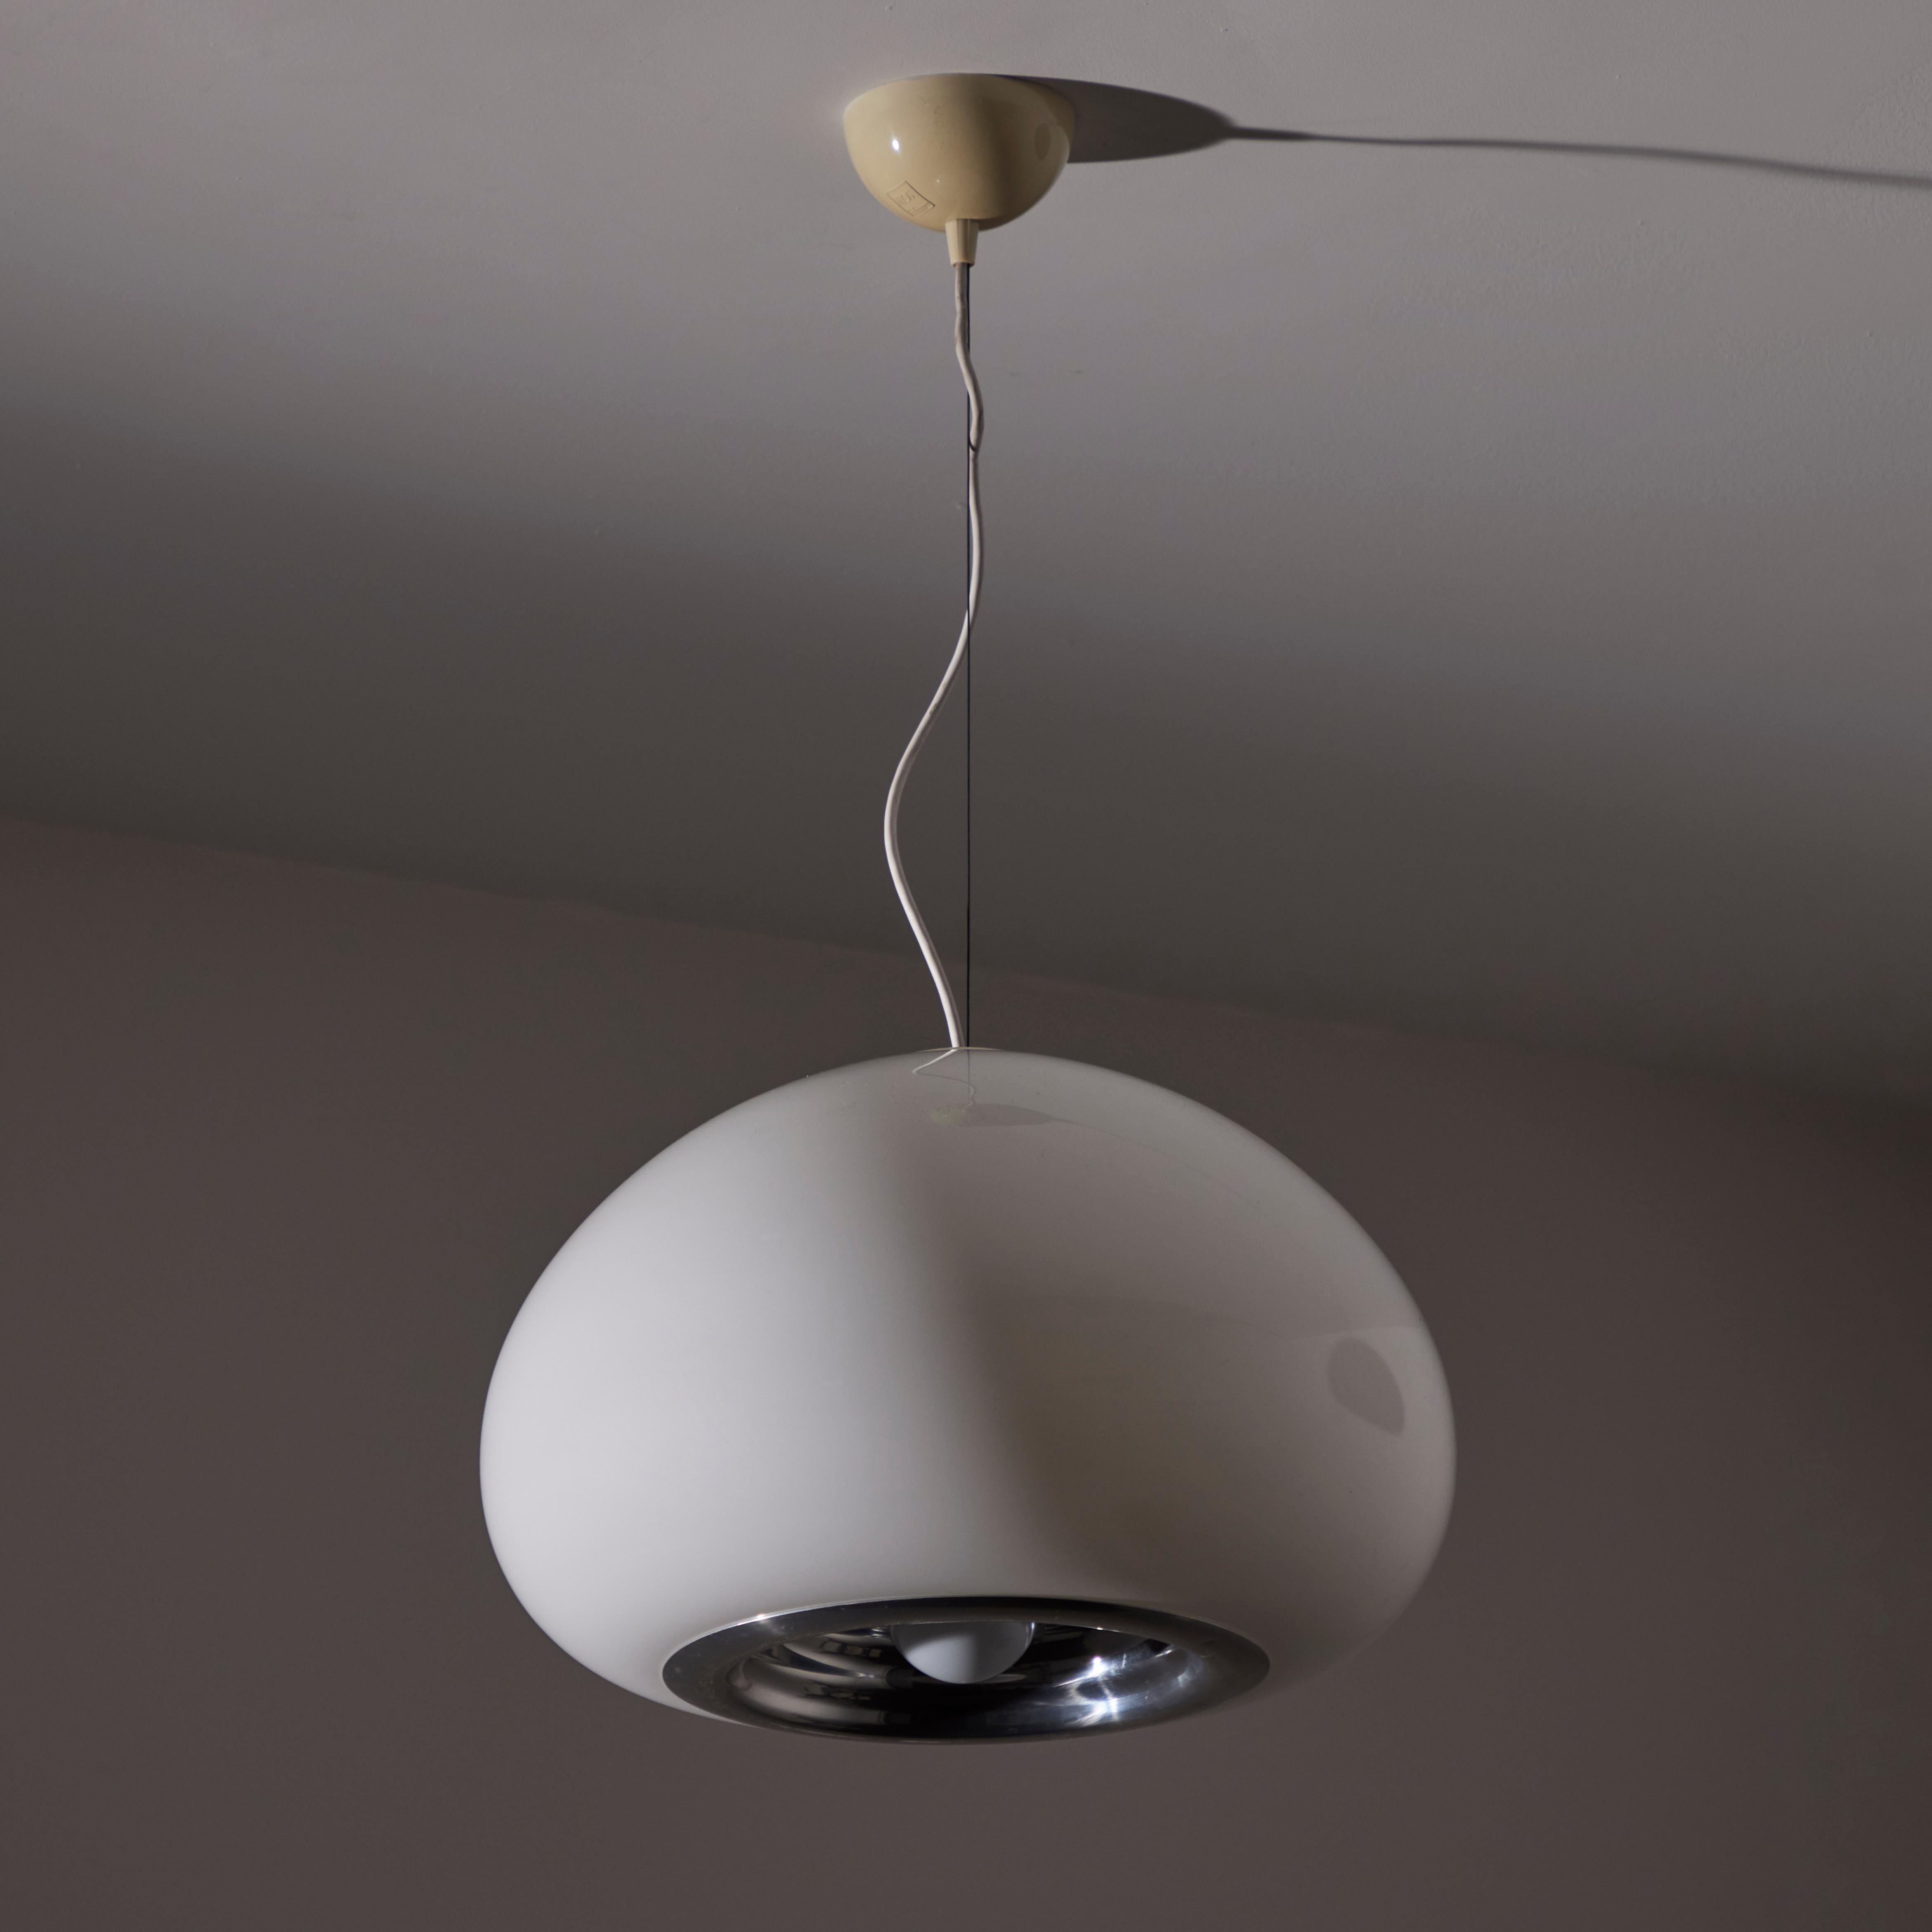 'Black and White' Ceiling Light by Achille & Pier Giacomo Castiglioni for Flos For Sale 3